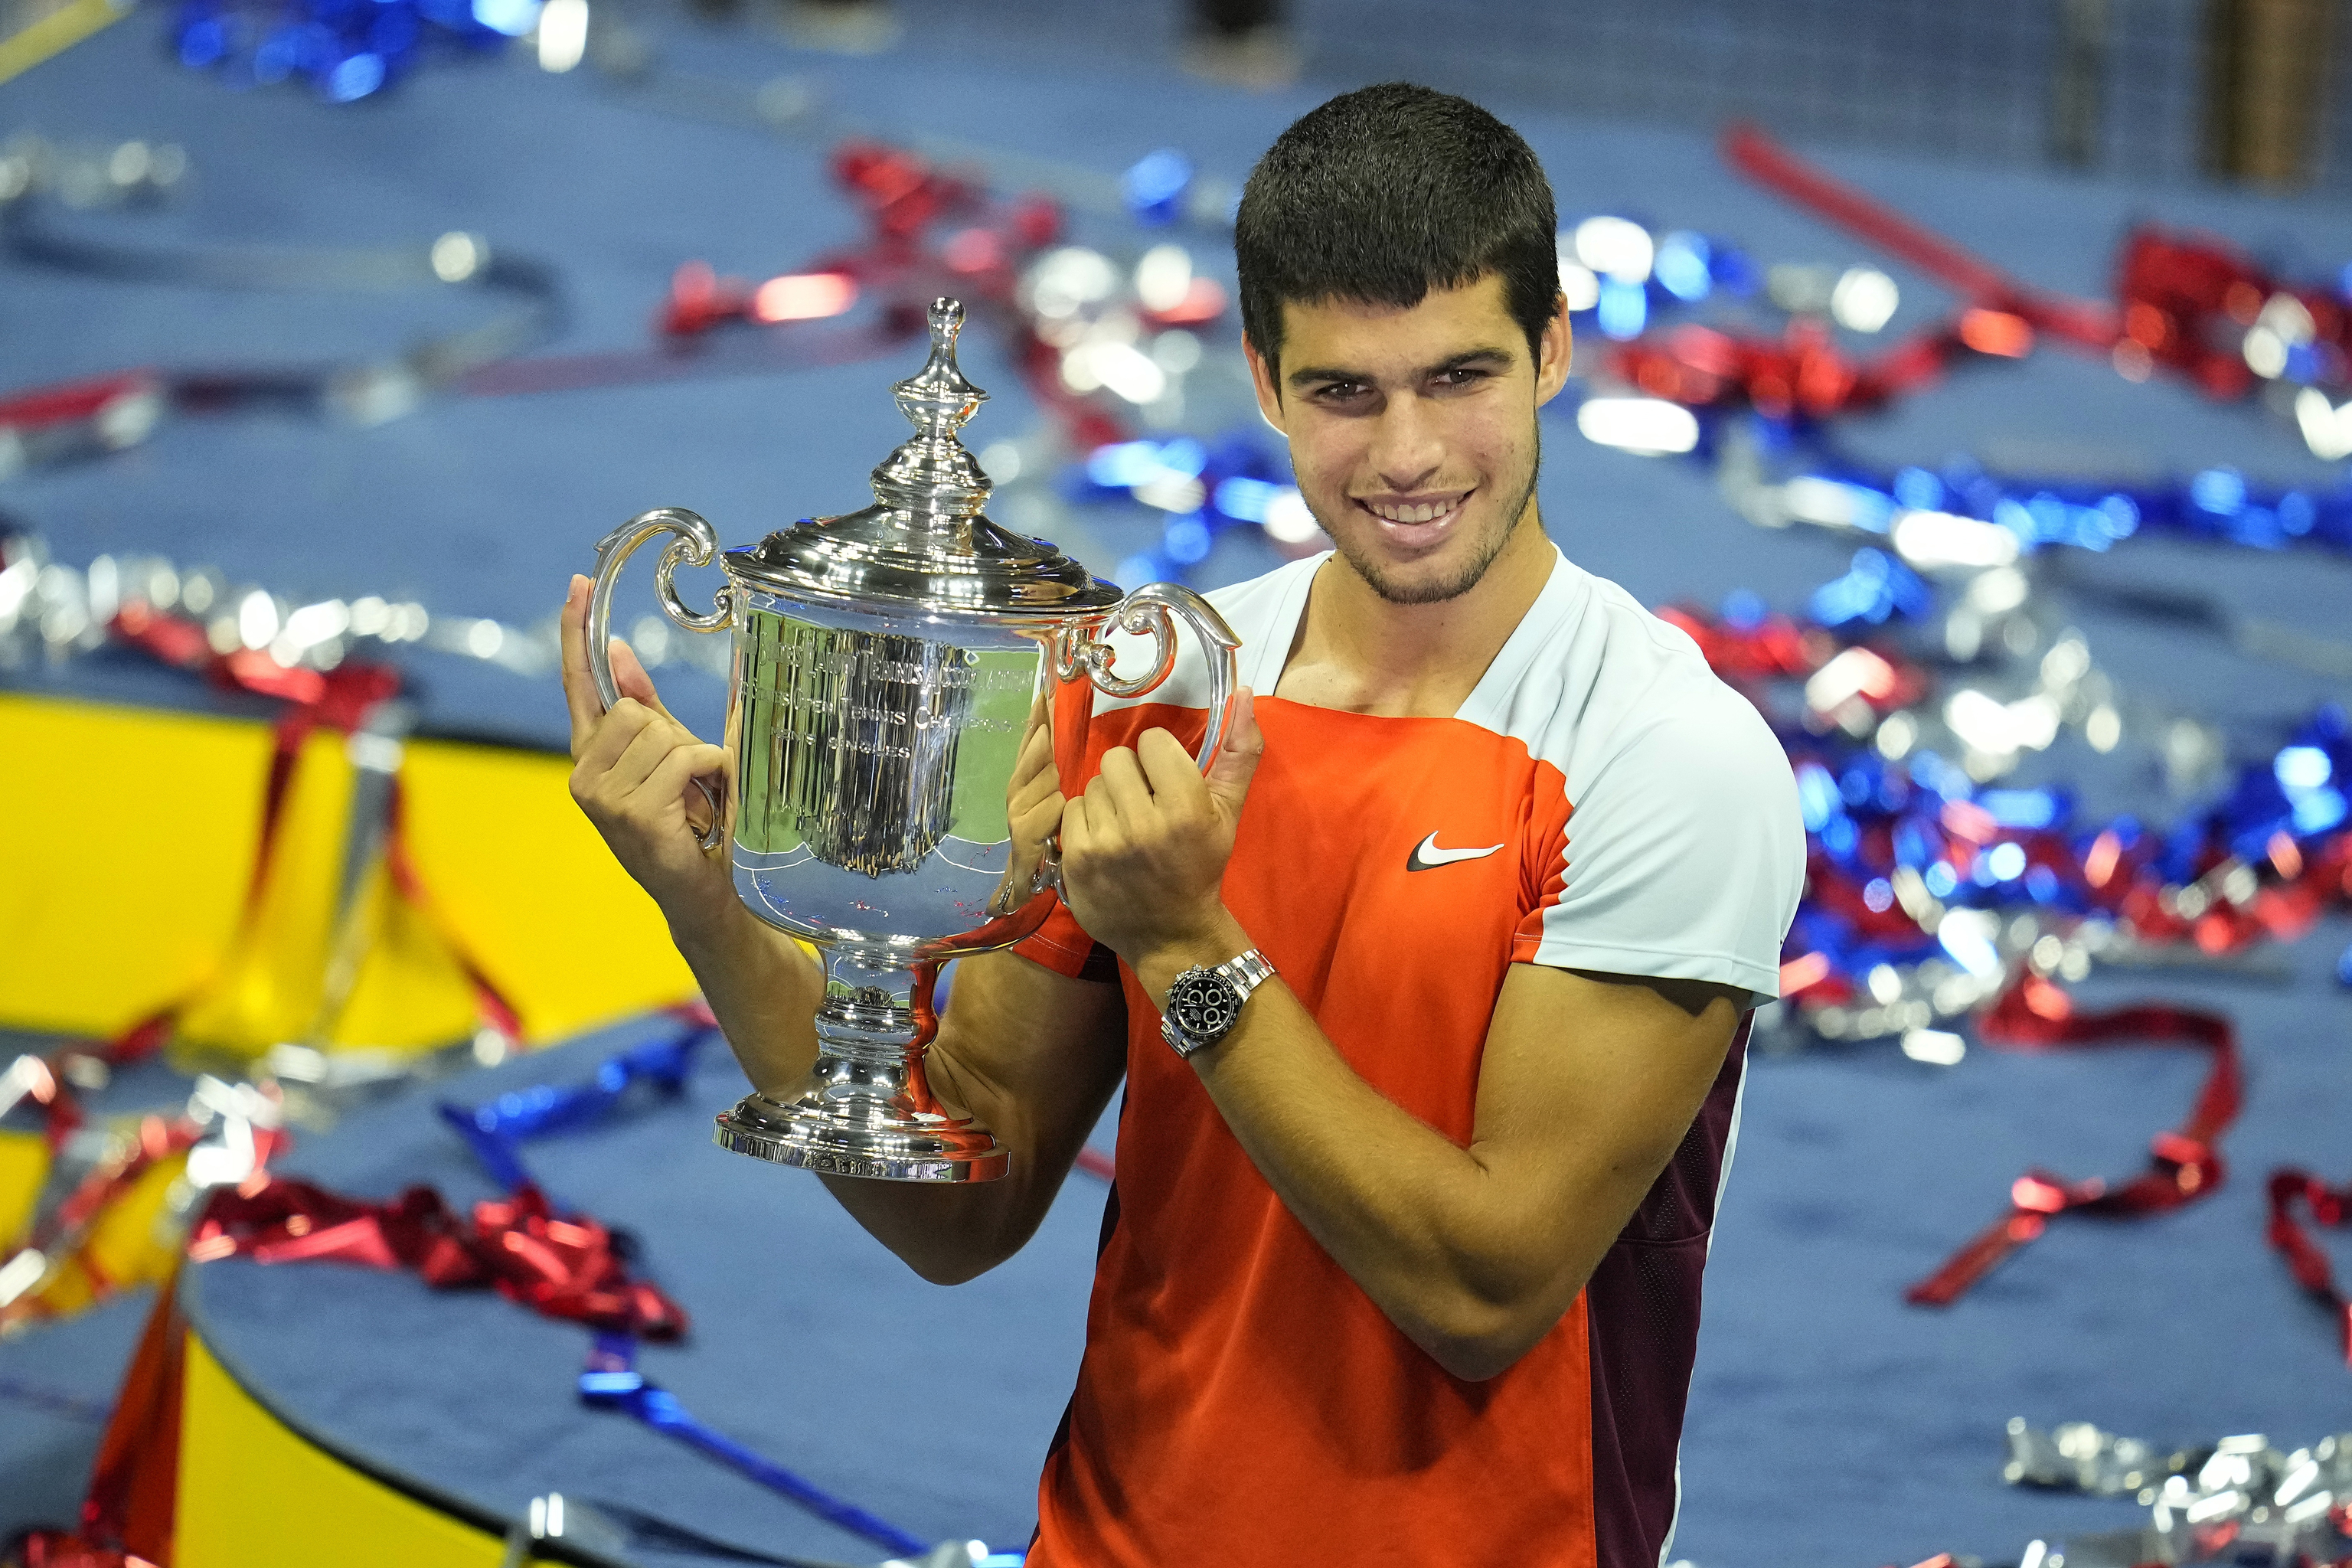 Carlos Alcaraz poses with his trophy after defeating Norway's Casper Ruud in the US Open final on September 11.